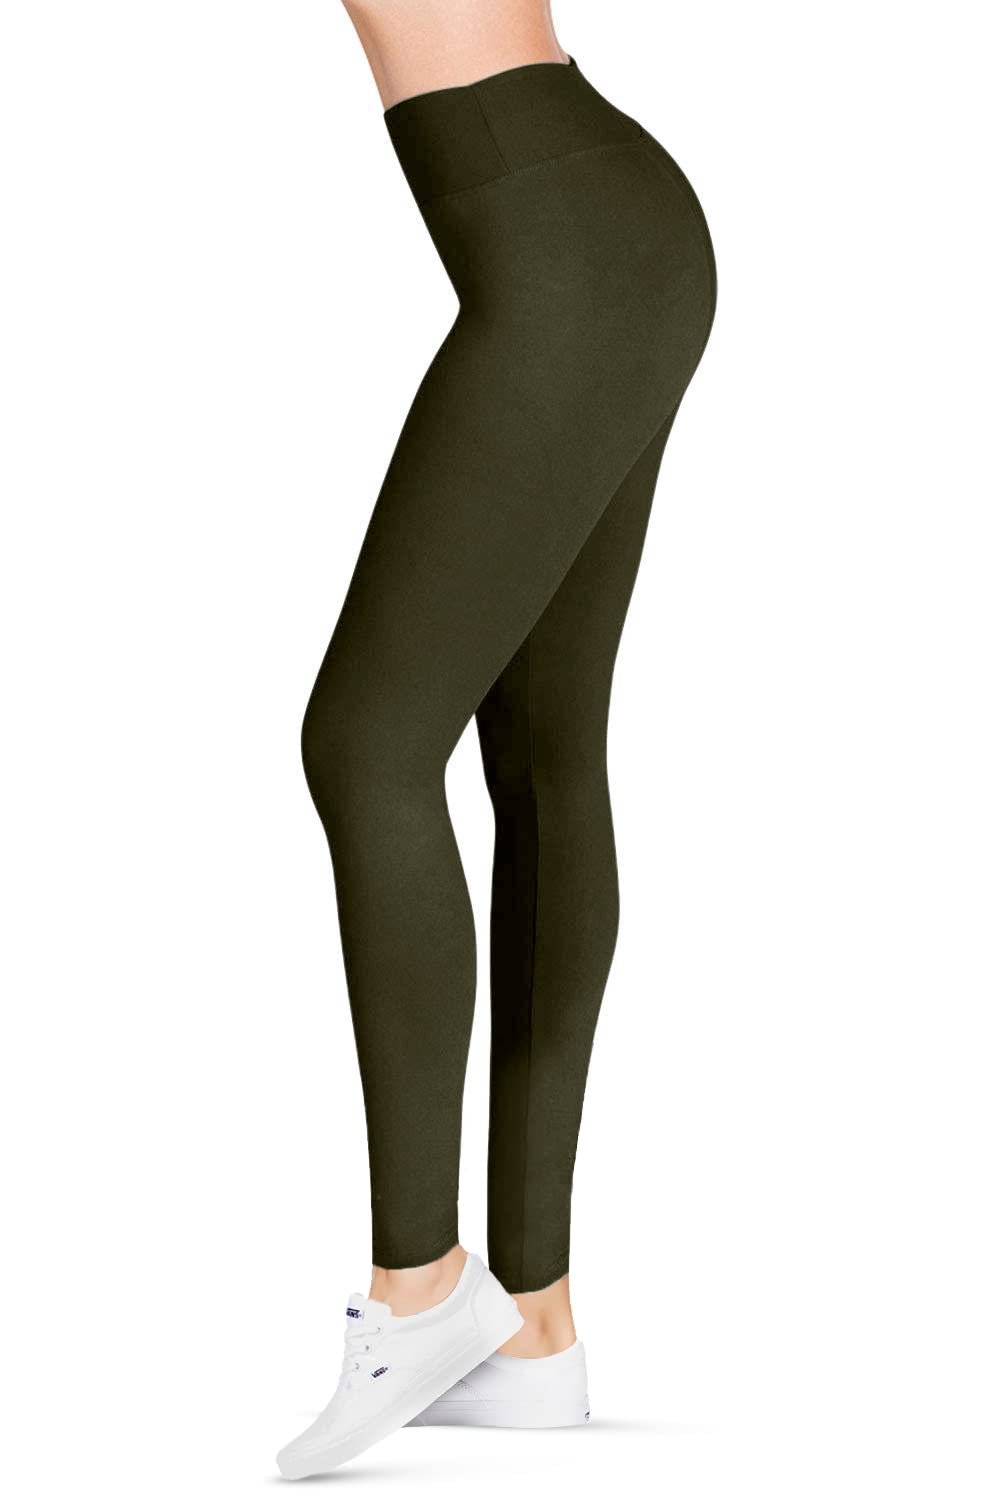 High Waisted Olive Leggings for Women, SATINA, Workout & Yoga